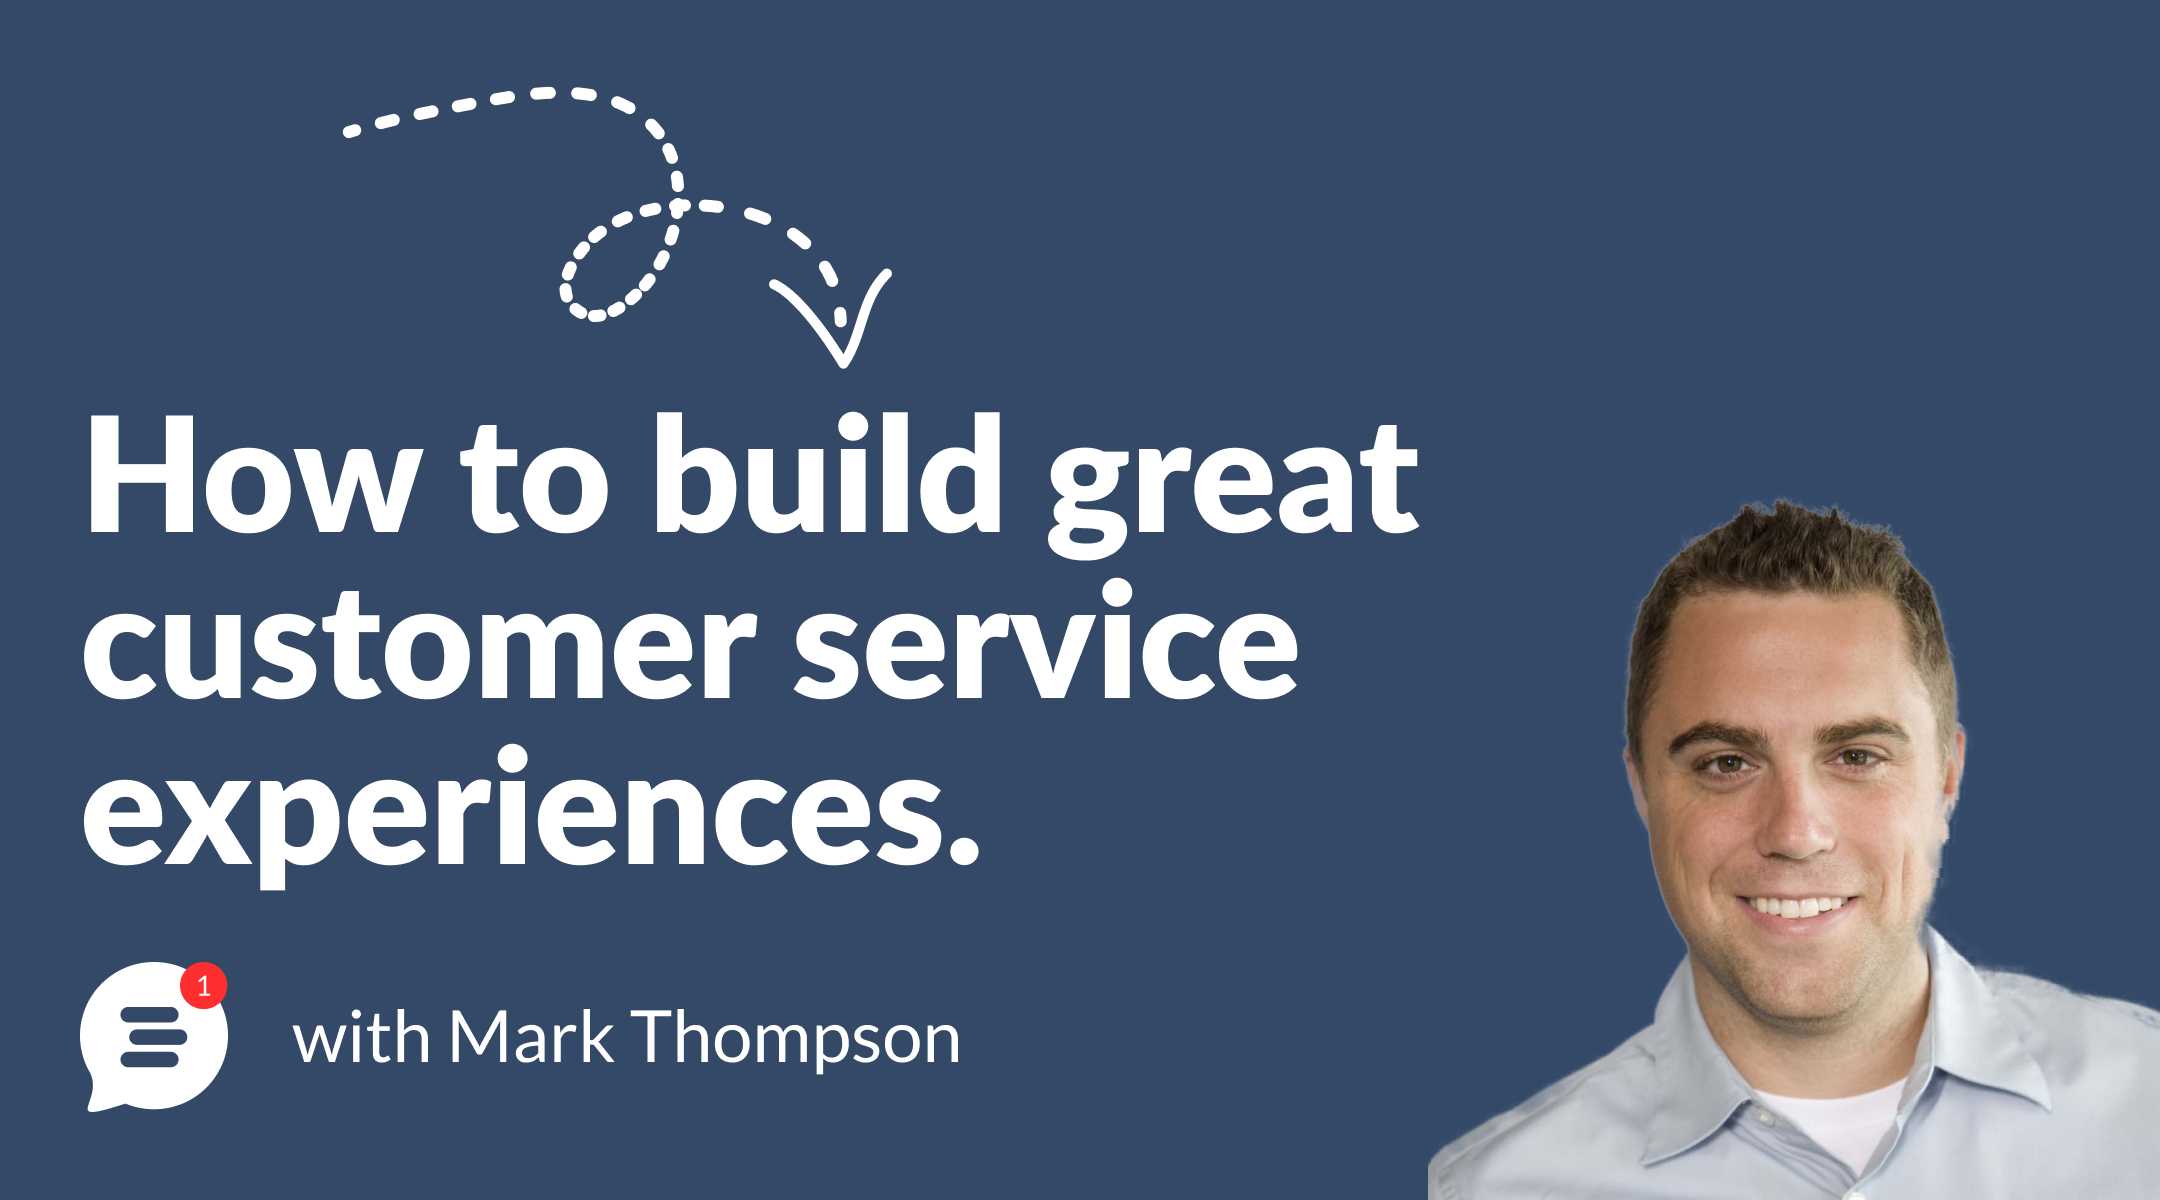 How to build great customer service experiences